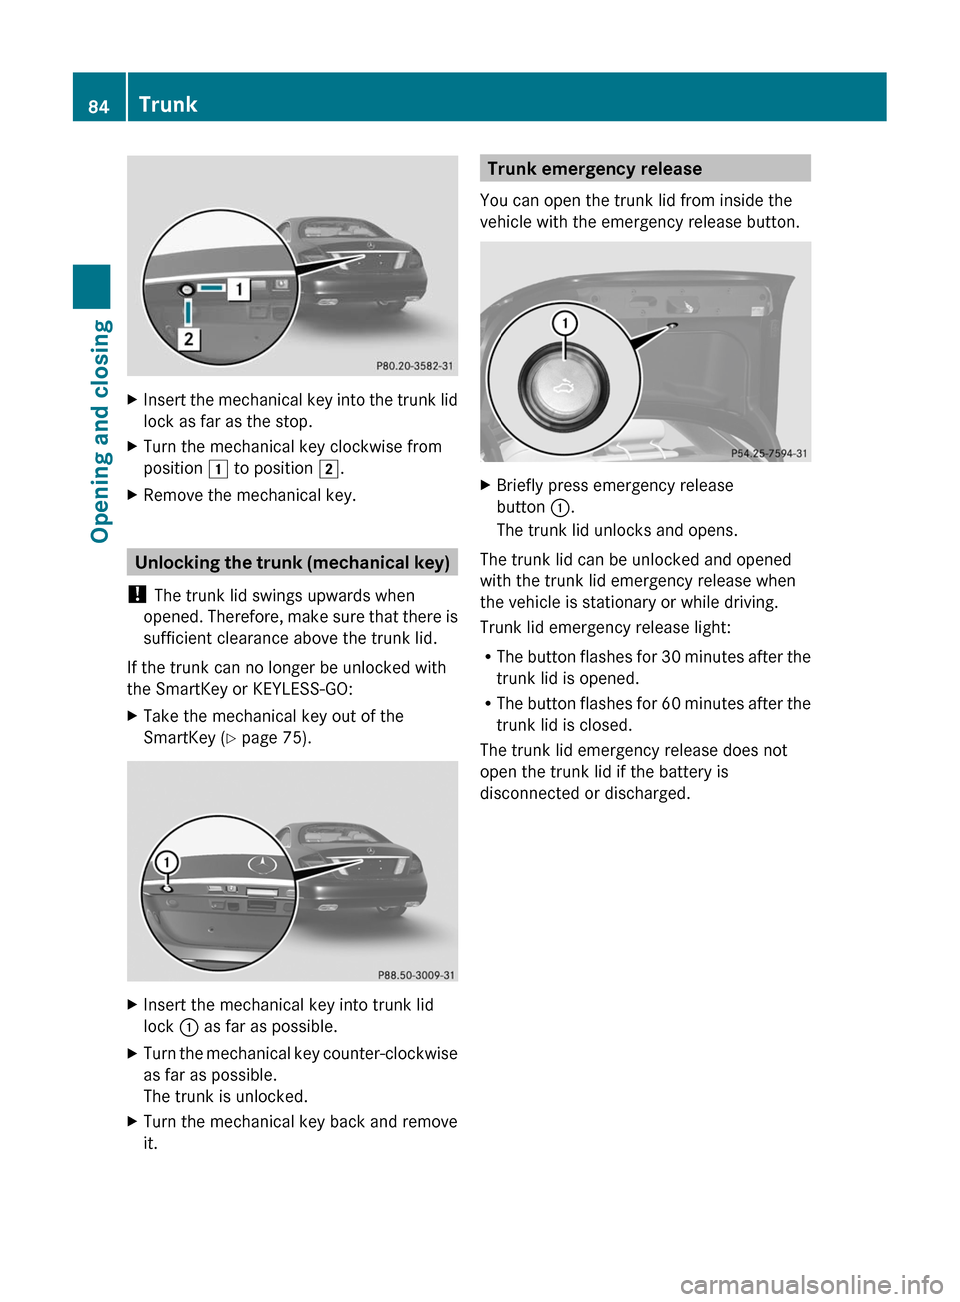 MERCEDES-BENZ CL-Class 2011 C216 Manual Online XInsert the mechanical key into the trunk lid
lock as far as the stop.
XTurn the mechanical key clockwise from
position 1 to position 2.
XRemove the mechanical key.
Unlocking the trunk (mechanical key